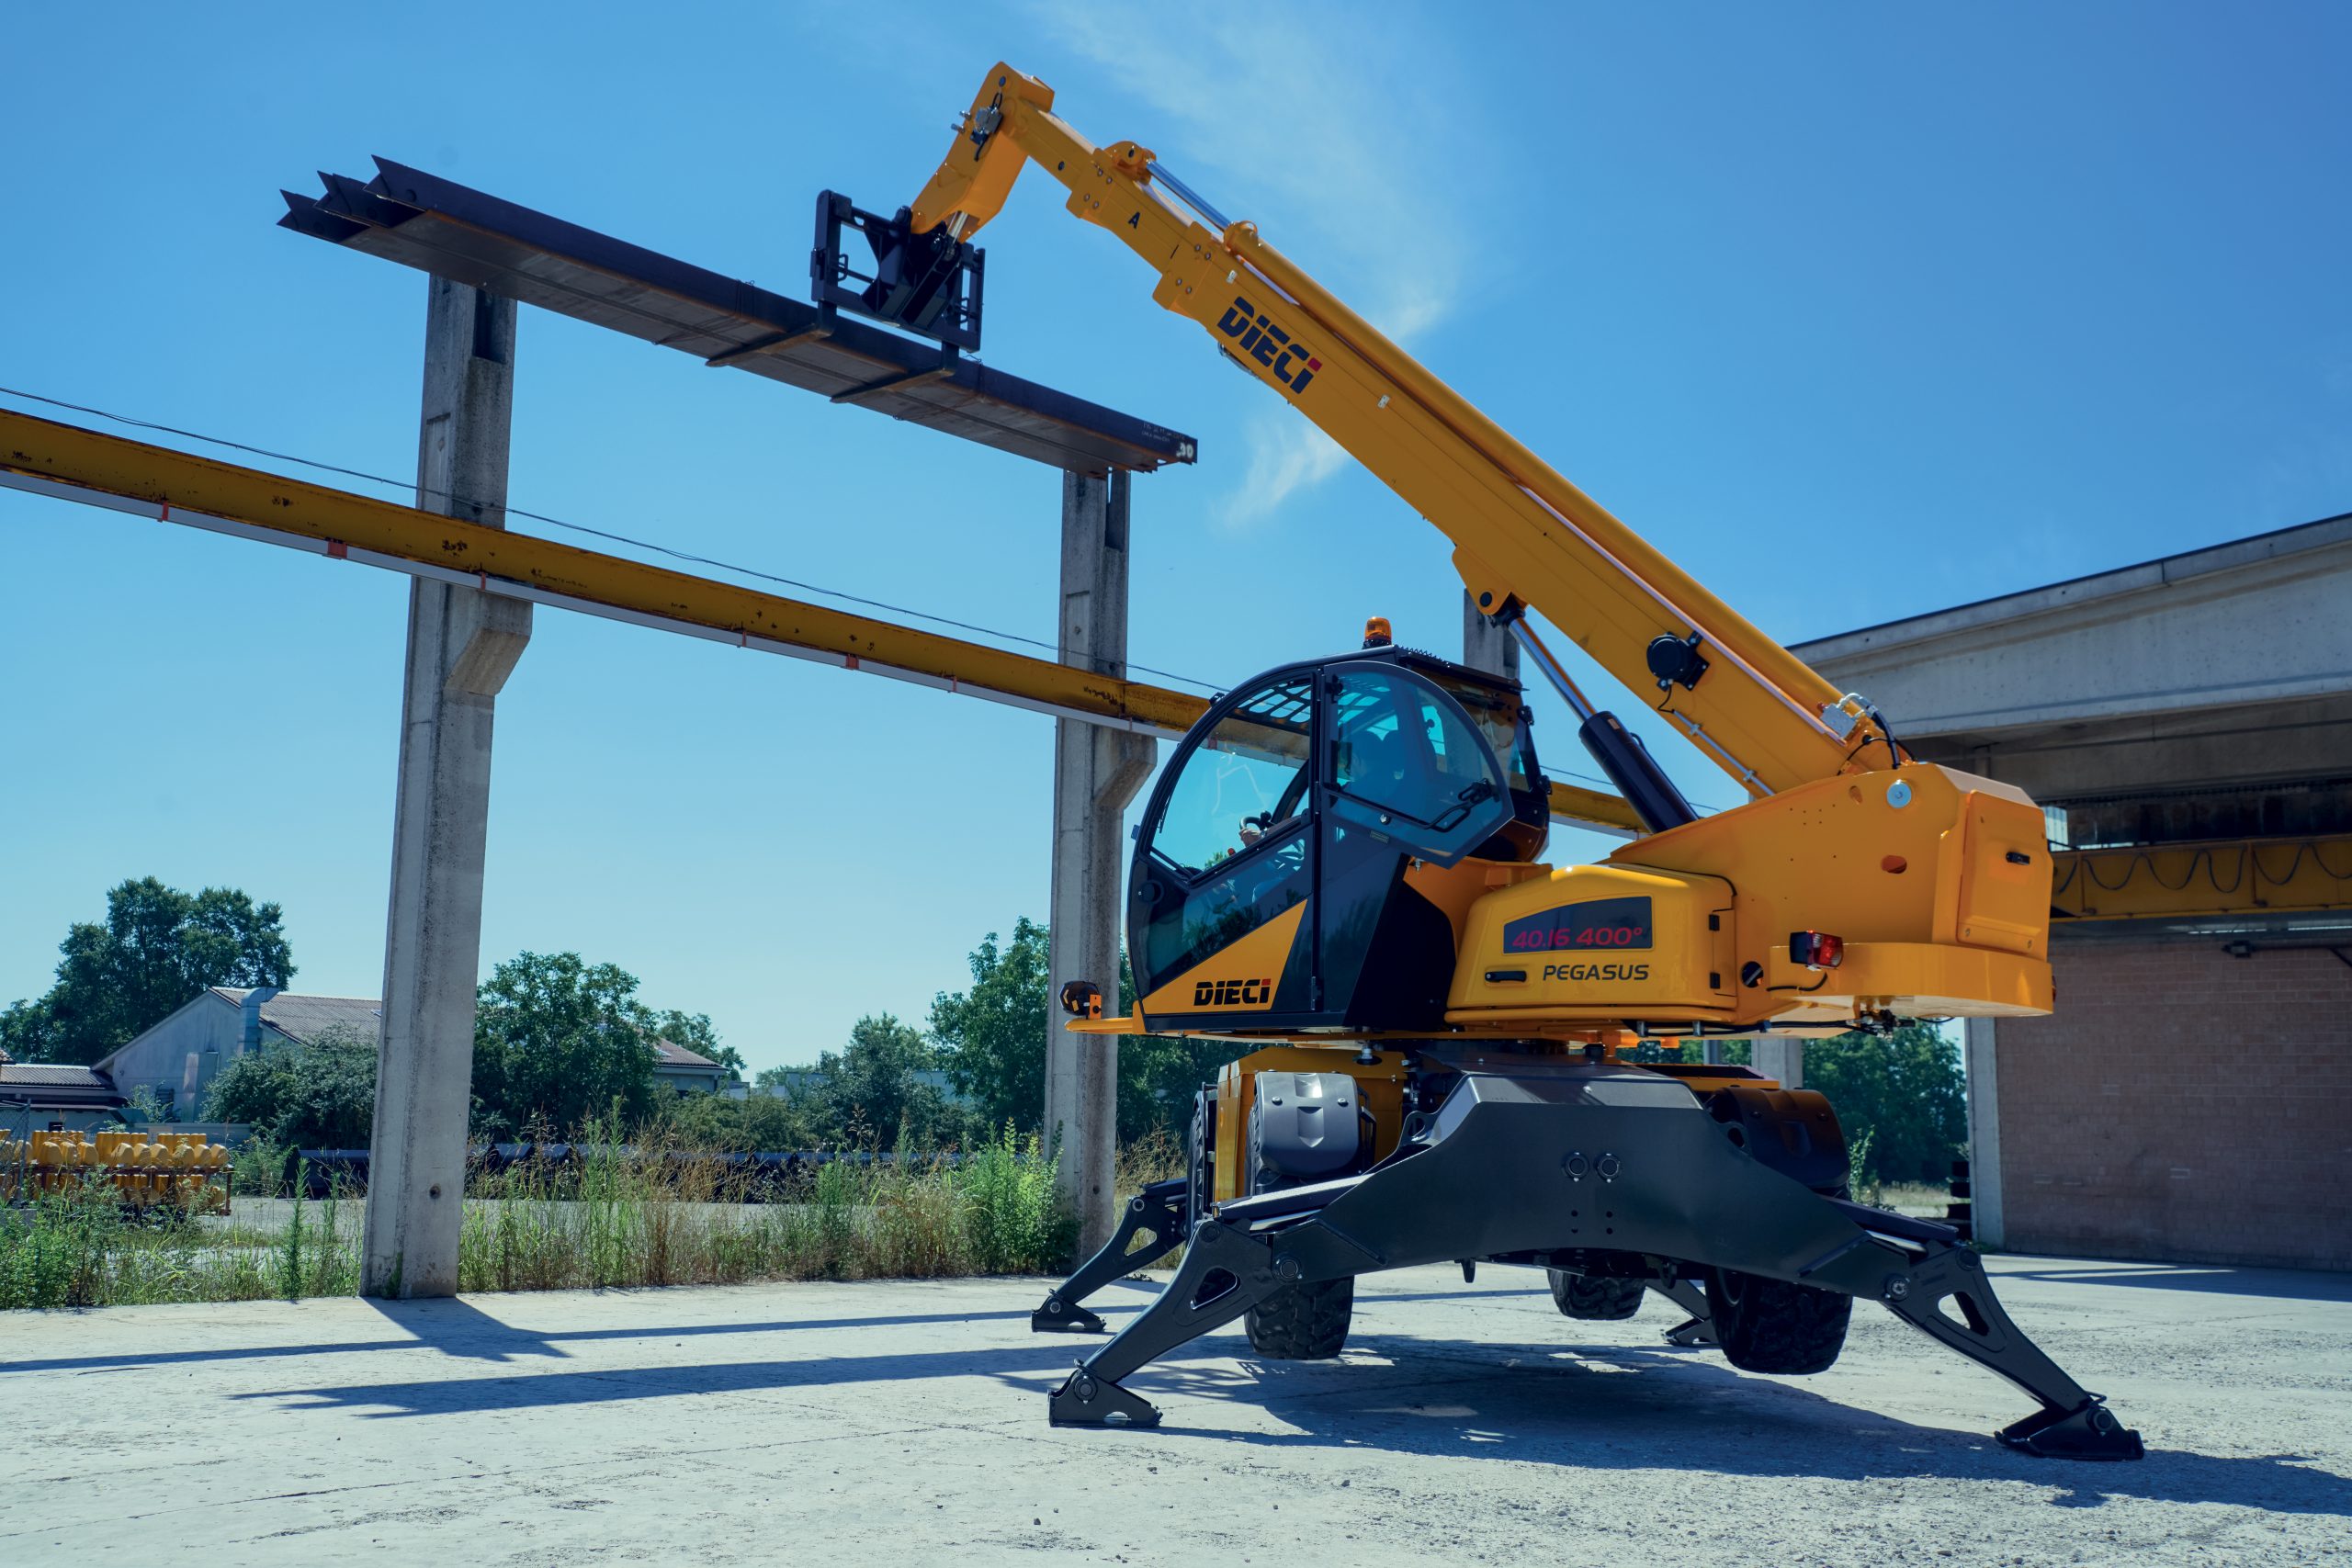 High Capacity Telehandler- Onsite Assessment and Operation by Personnel